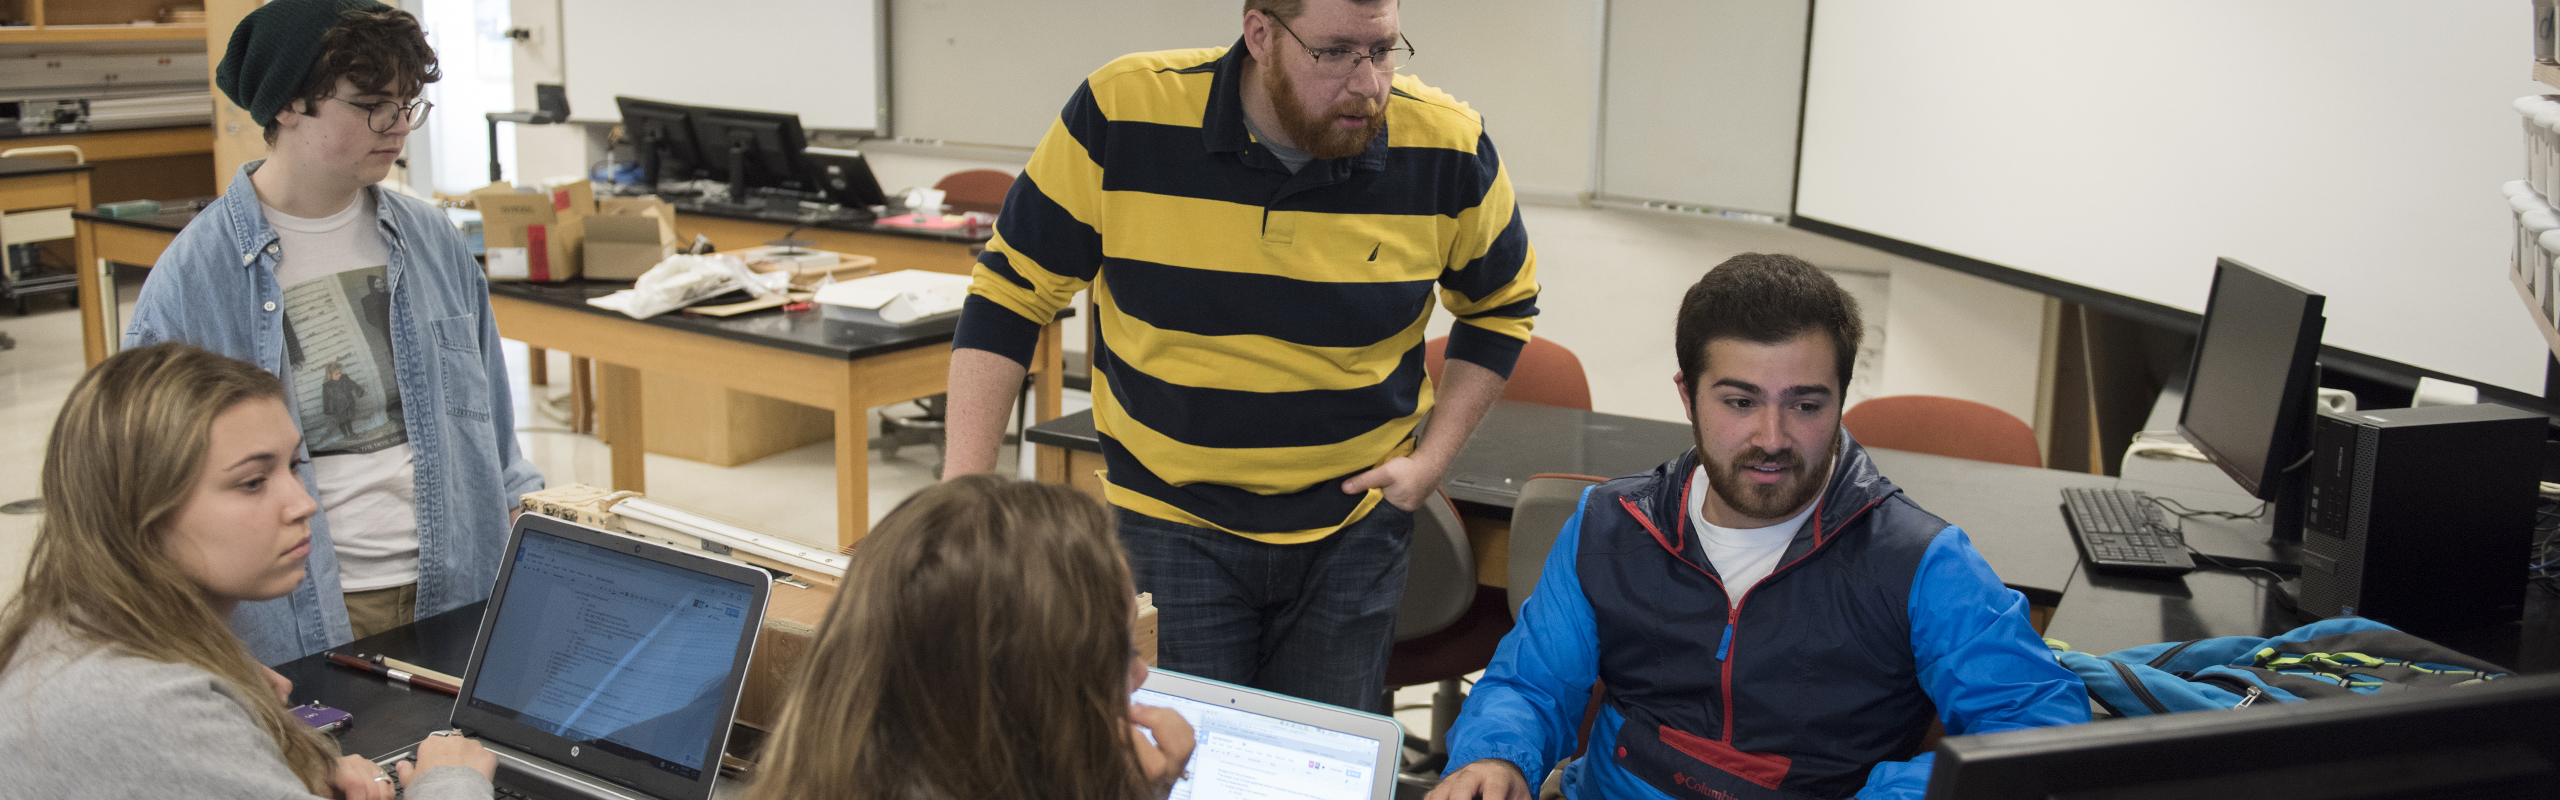 Matt Sears '18 works with students and Jeremy Hohertz, Instructor in Physics